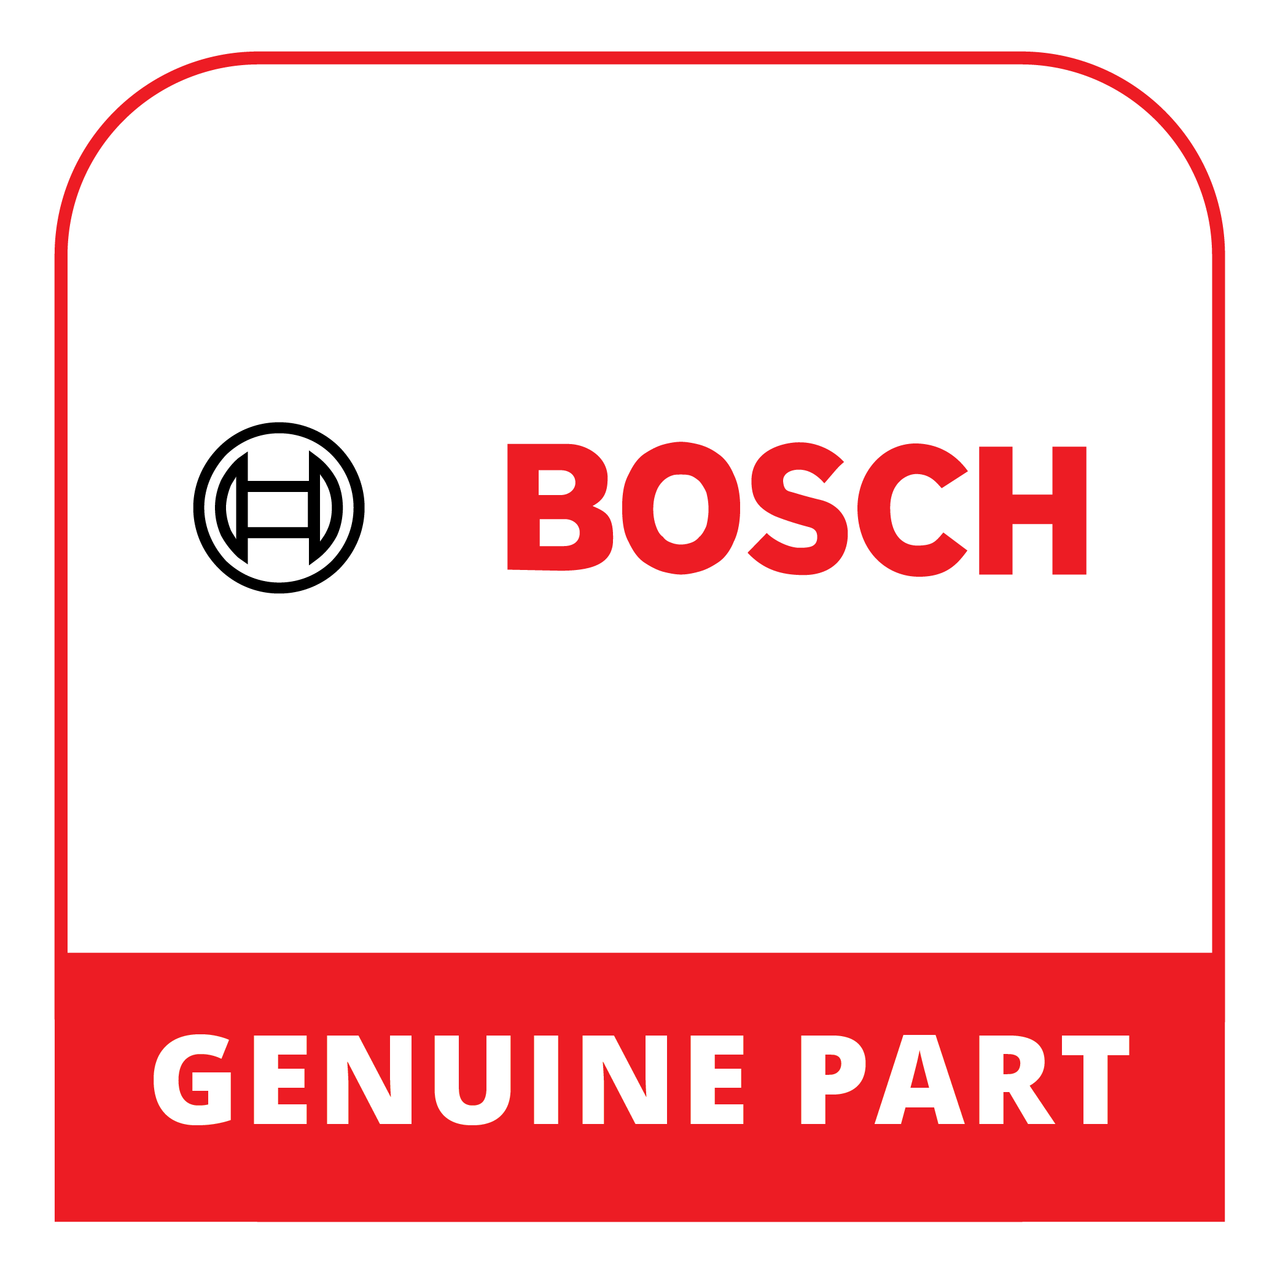 Bosch 00491180 - Magnetron - Genuine Bosch (Thermador) Part